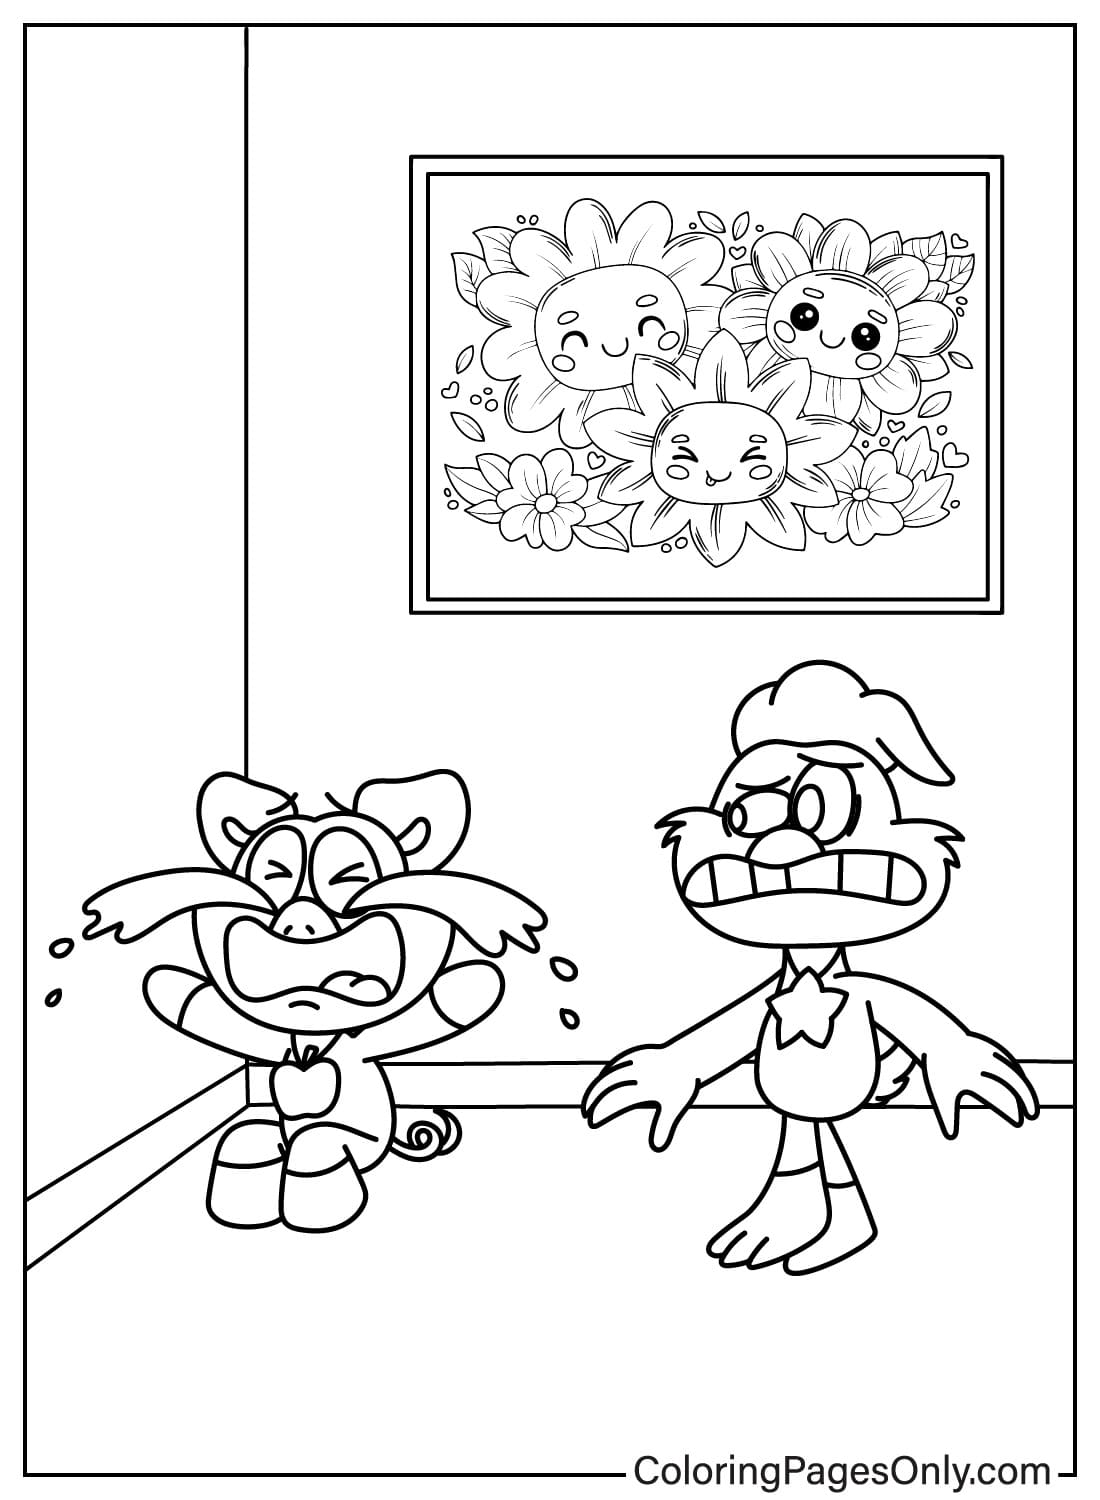 PickyPiggy and KickinChicken Coloring Page from KickinChicken